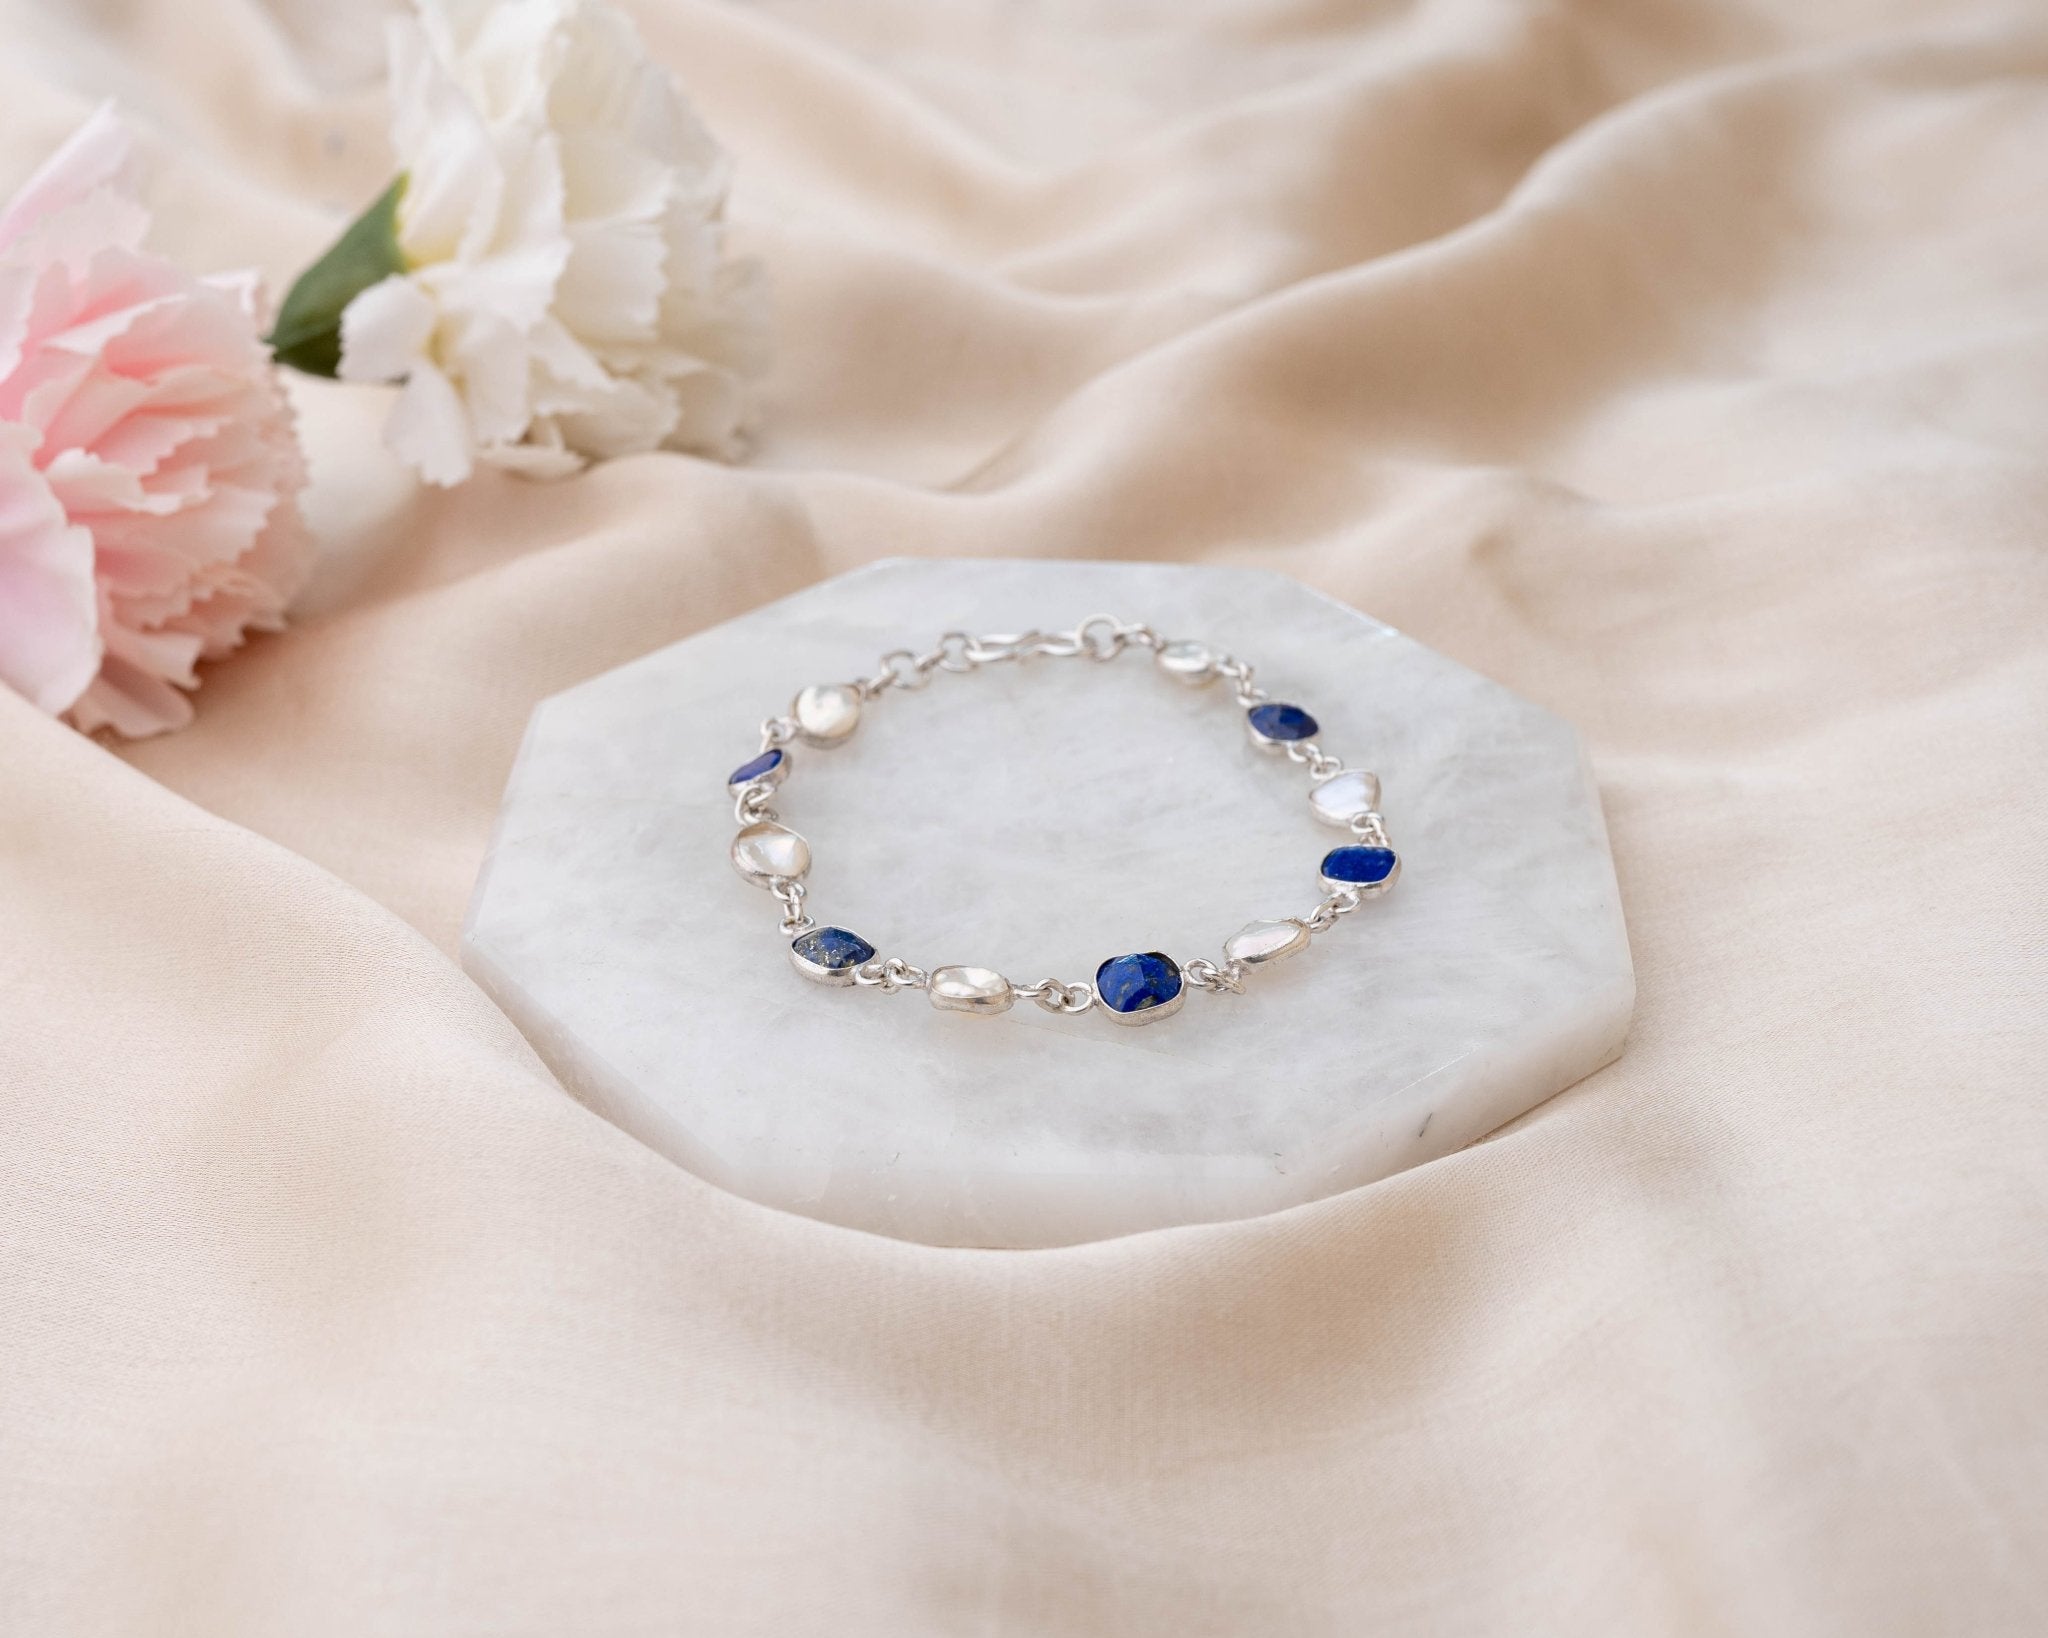 Lapis Lazuli With Pearl Bracelet - Bodh Gem and Crystals